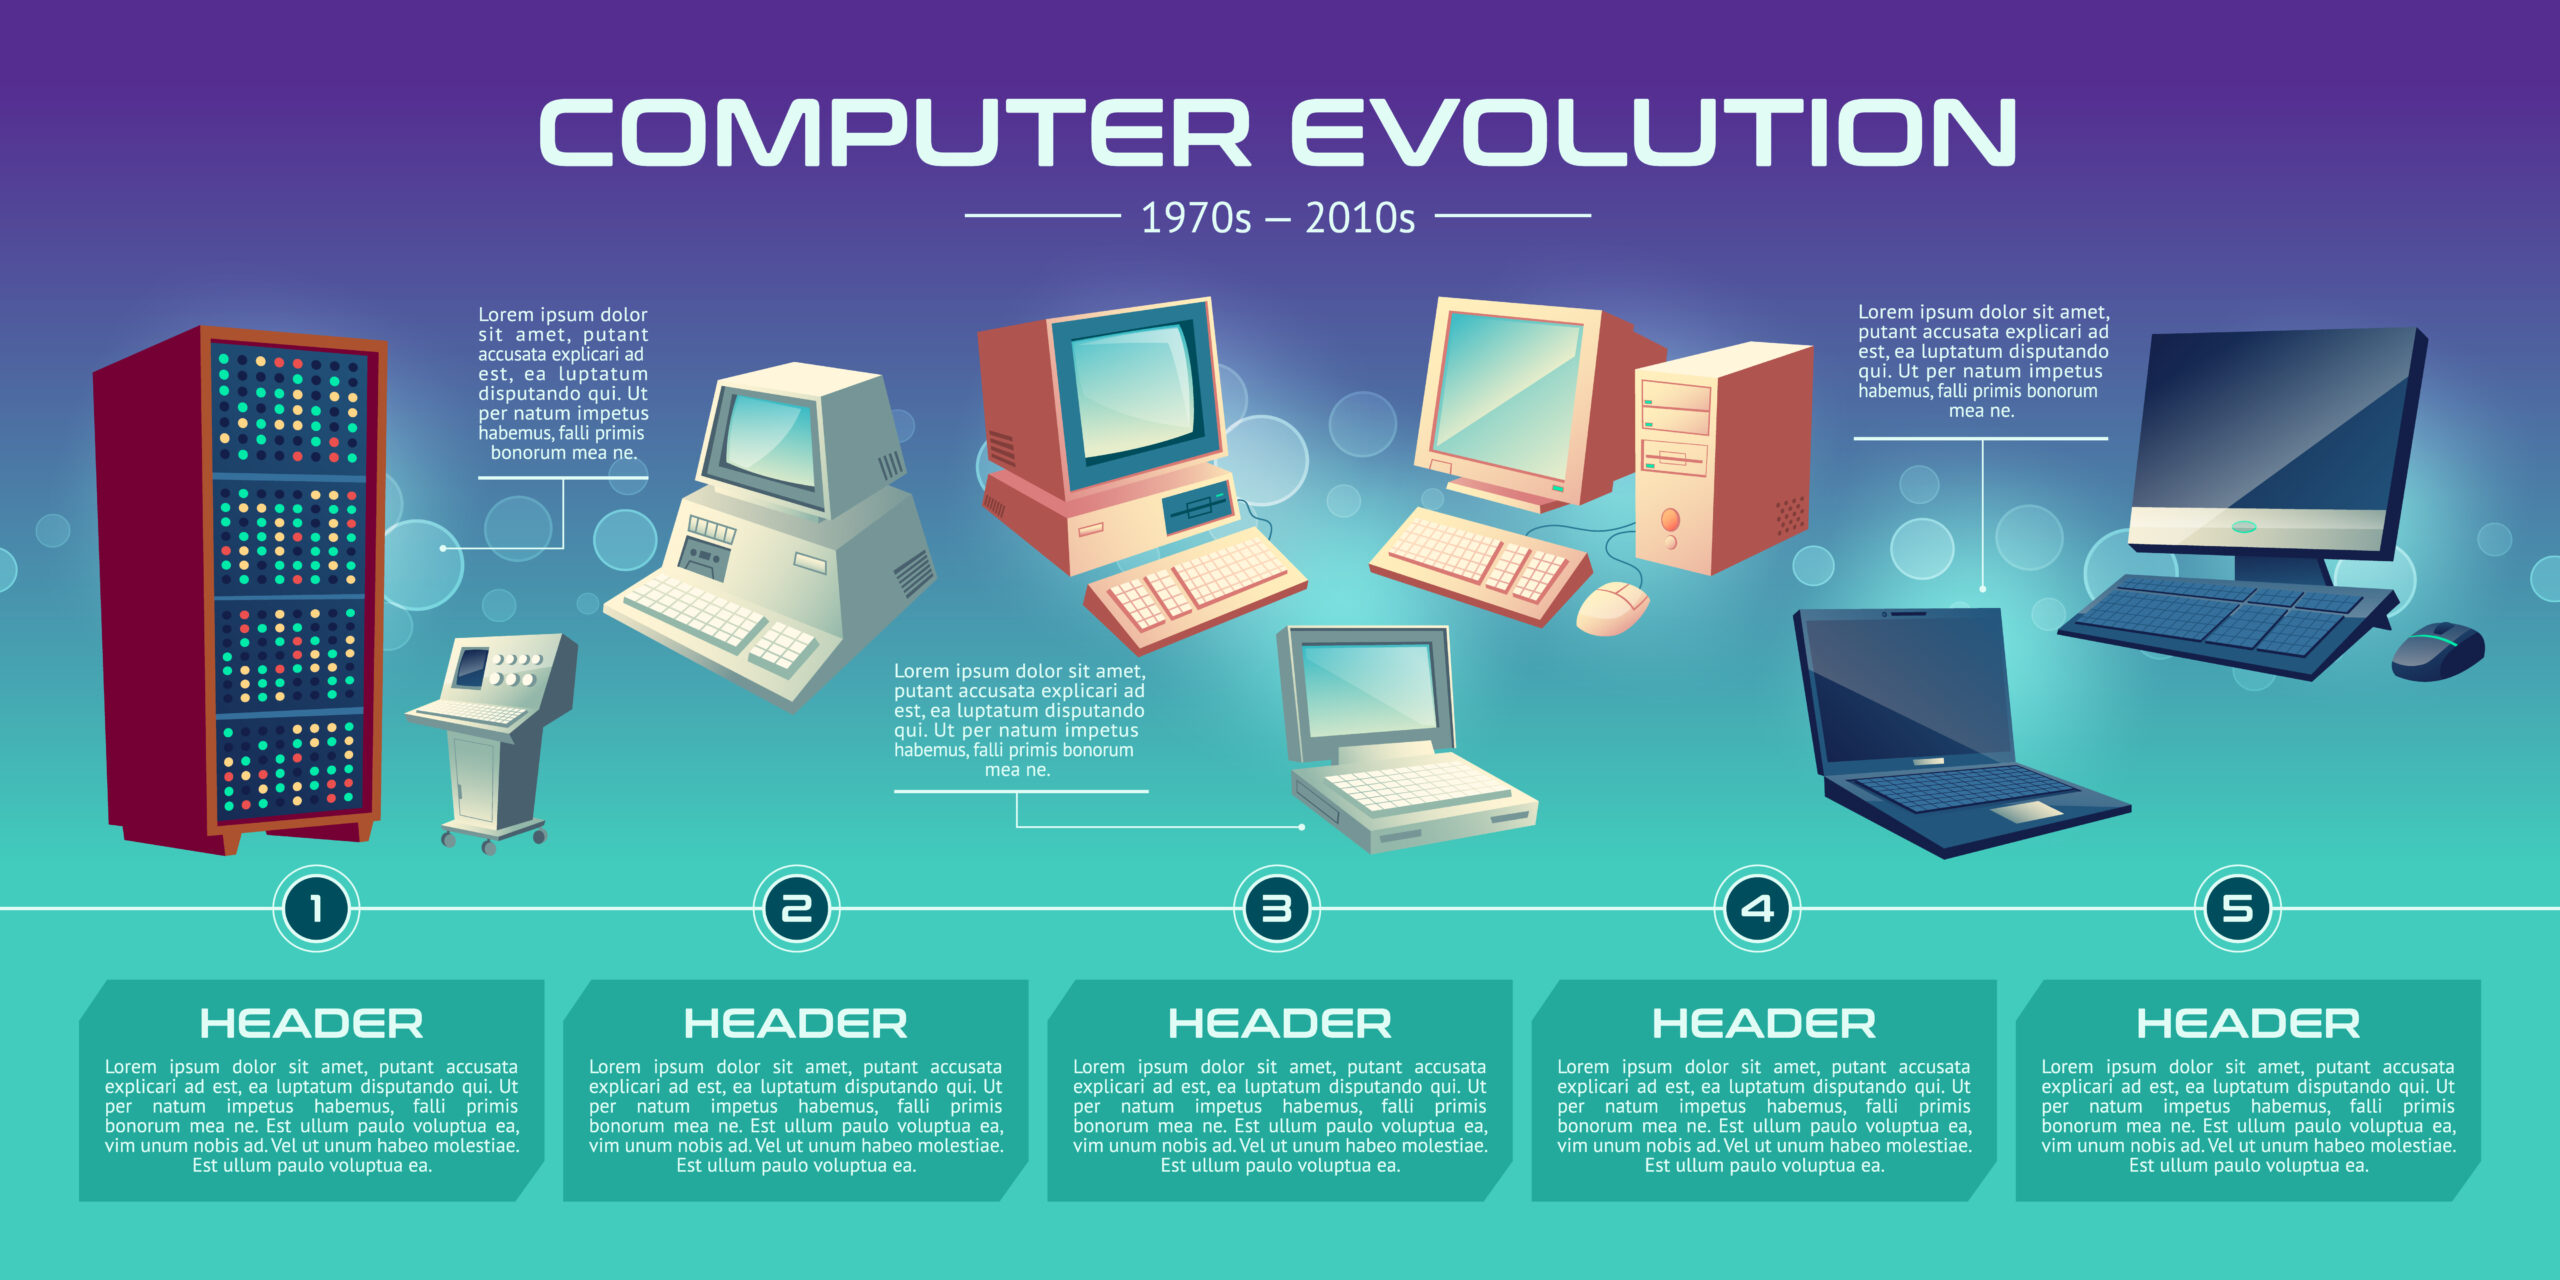 Explanation of Computers and Their Evolution